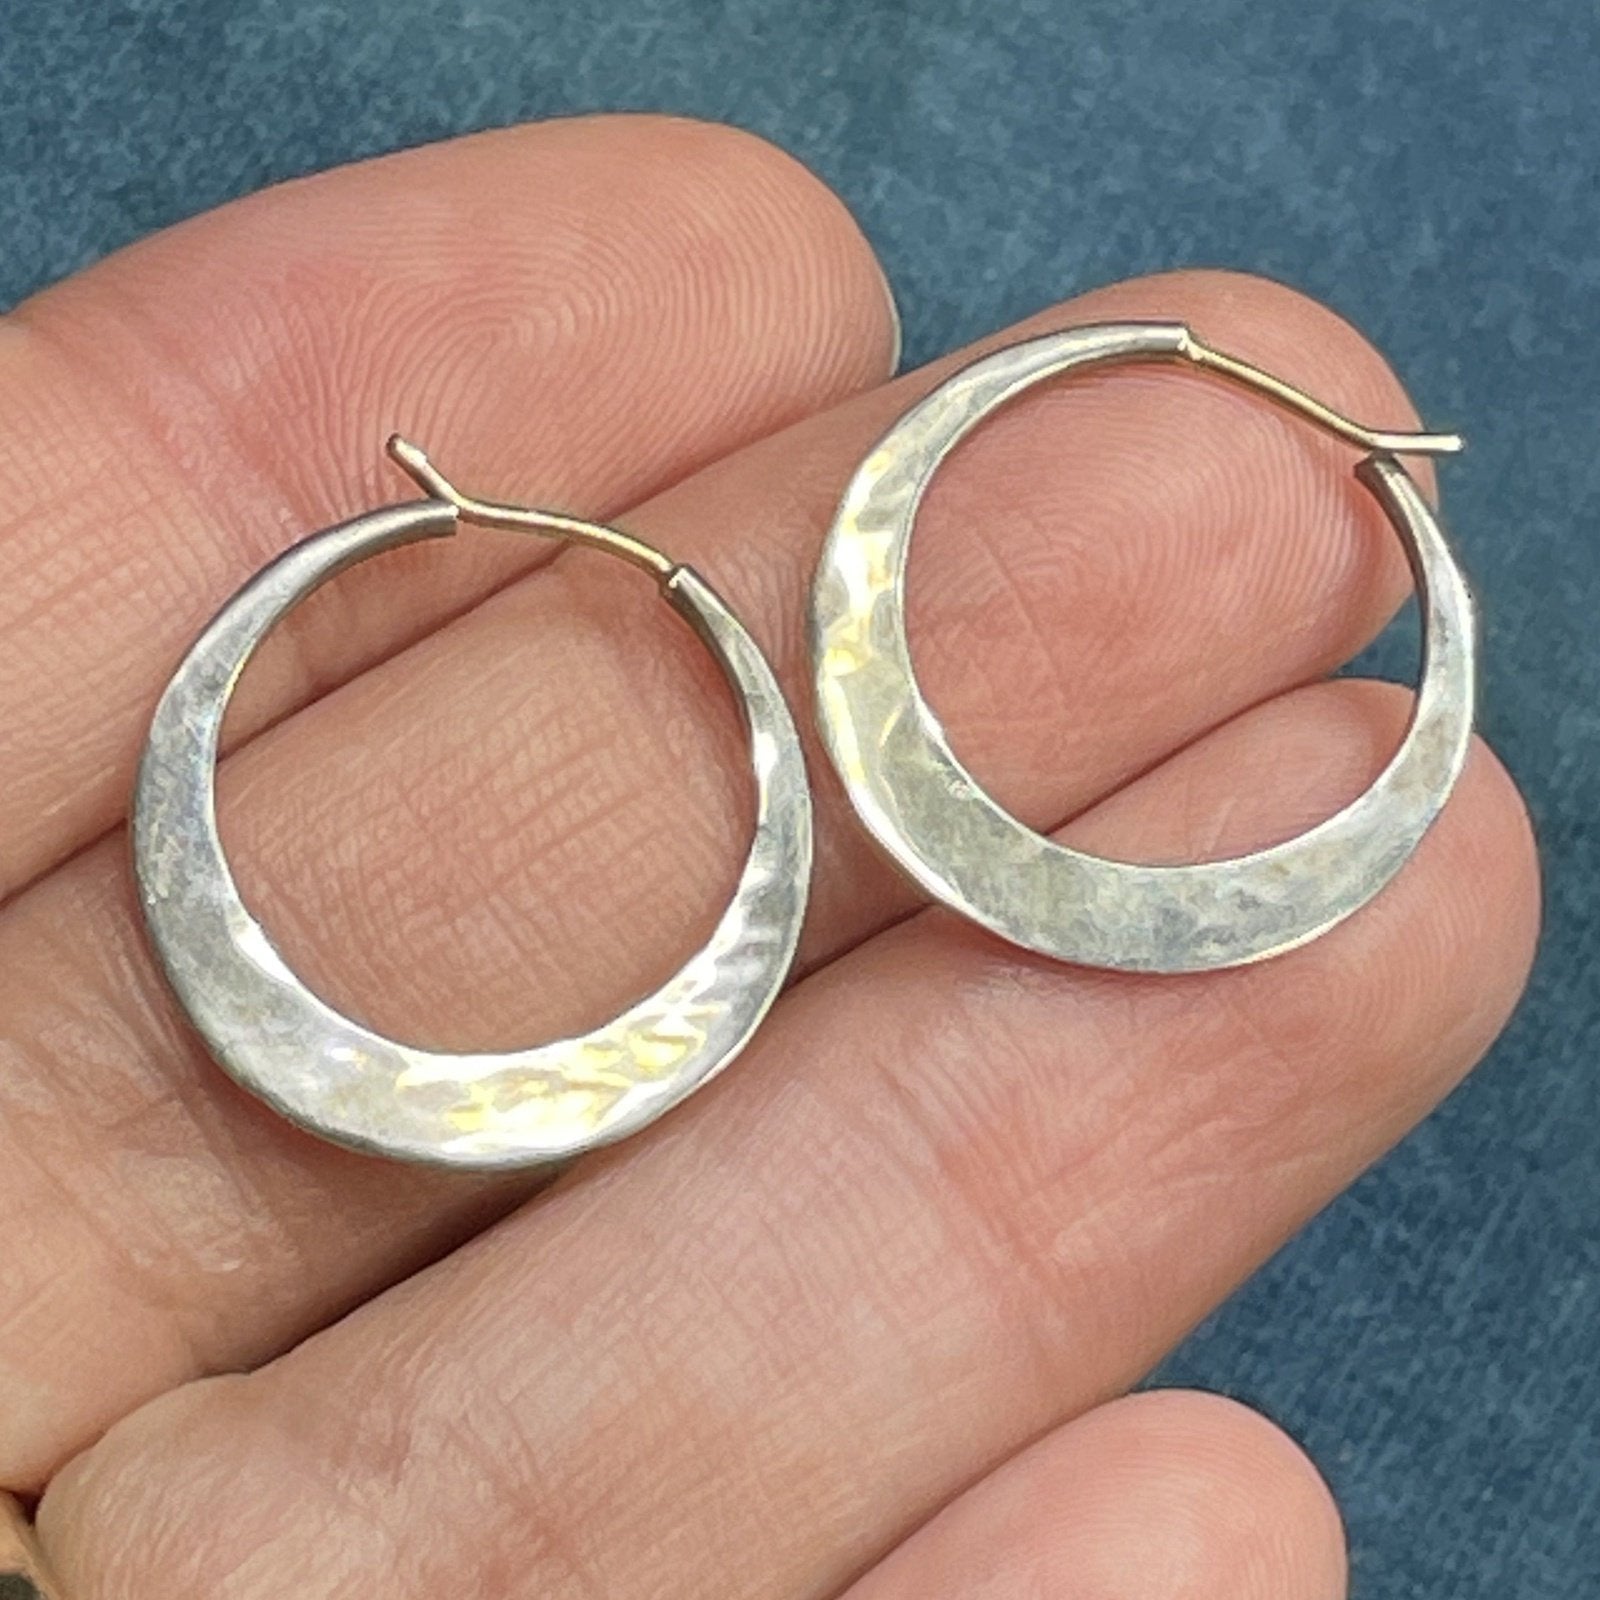 Ed Levin 14kt Gold Hand Hammered Hoop Earrings